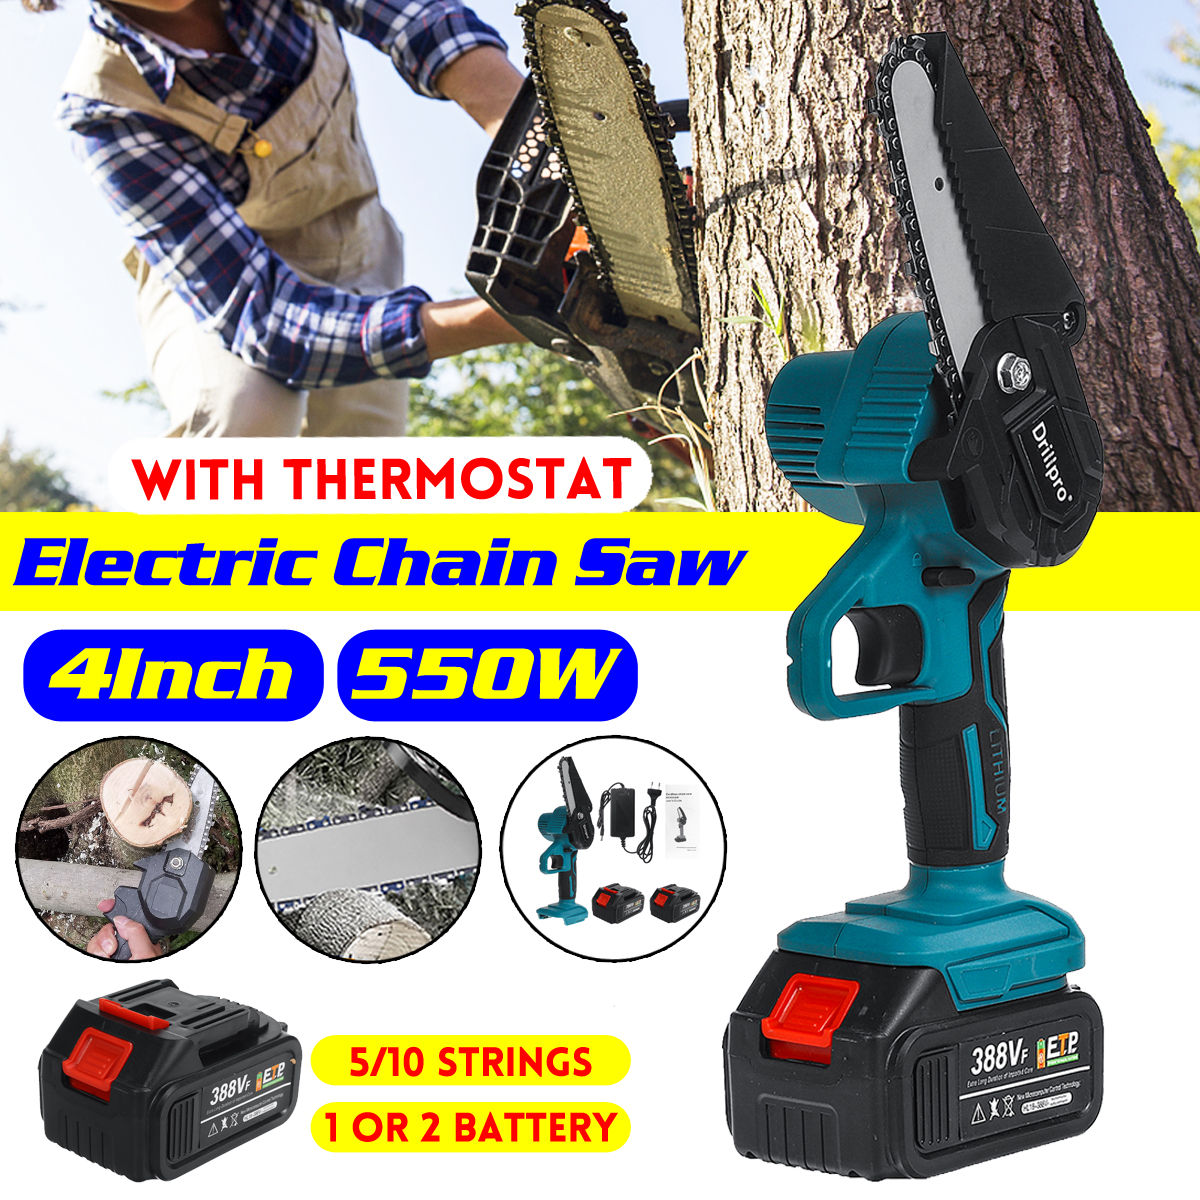 Drillpro-4-Inch-Electric-Chain-Saw-Mini-Cordless-550W-One-Hand-Saw-Woodworking-Wood-Cutter-W-1pc-or--1855260-1